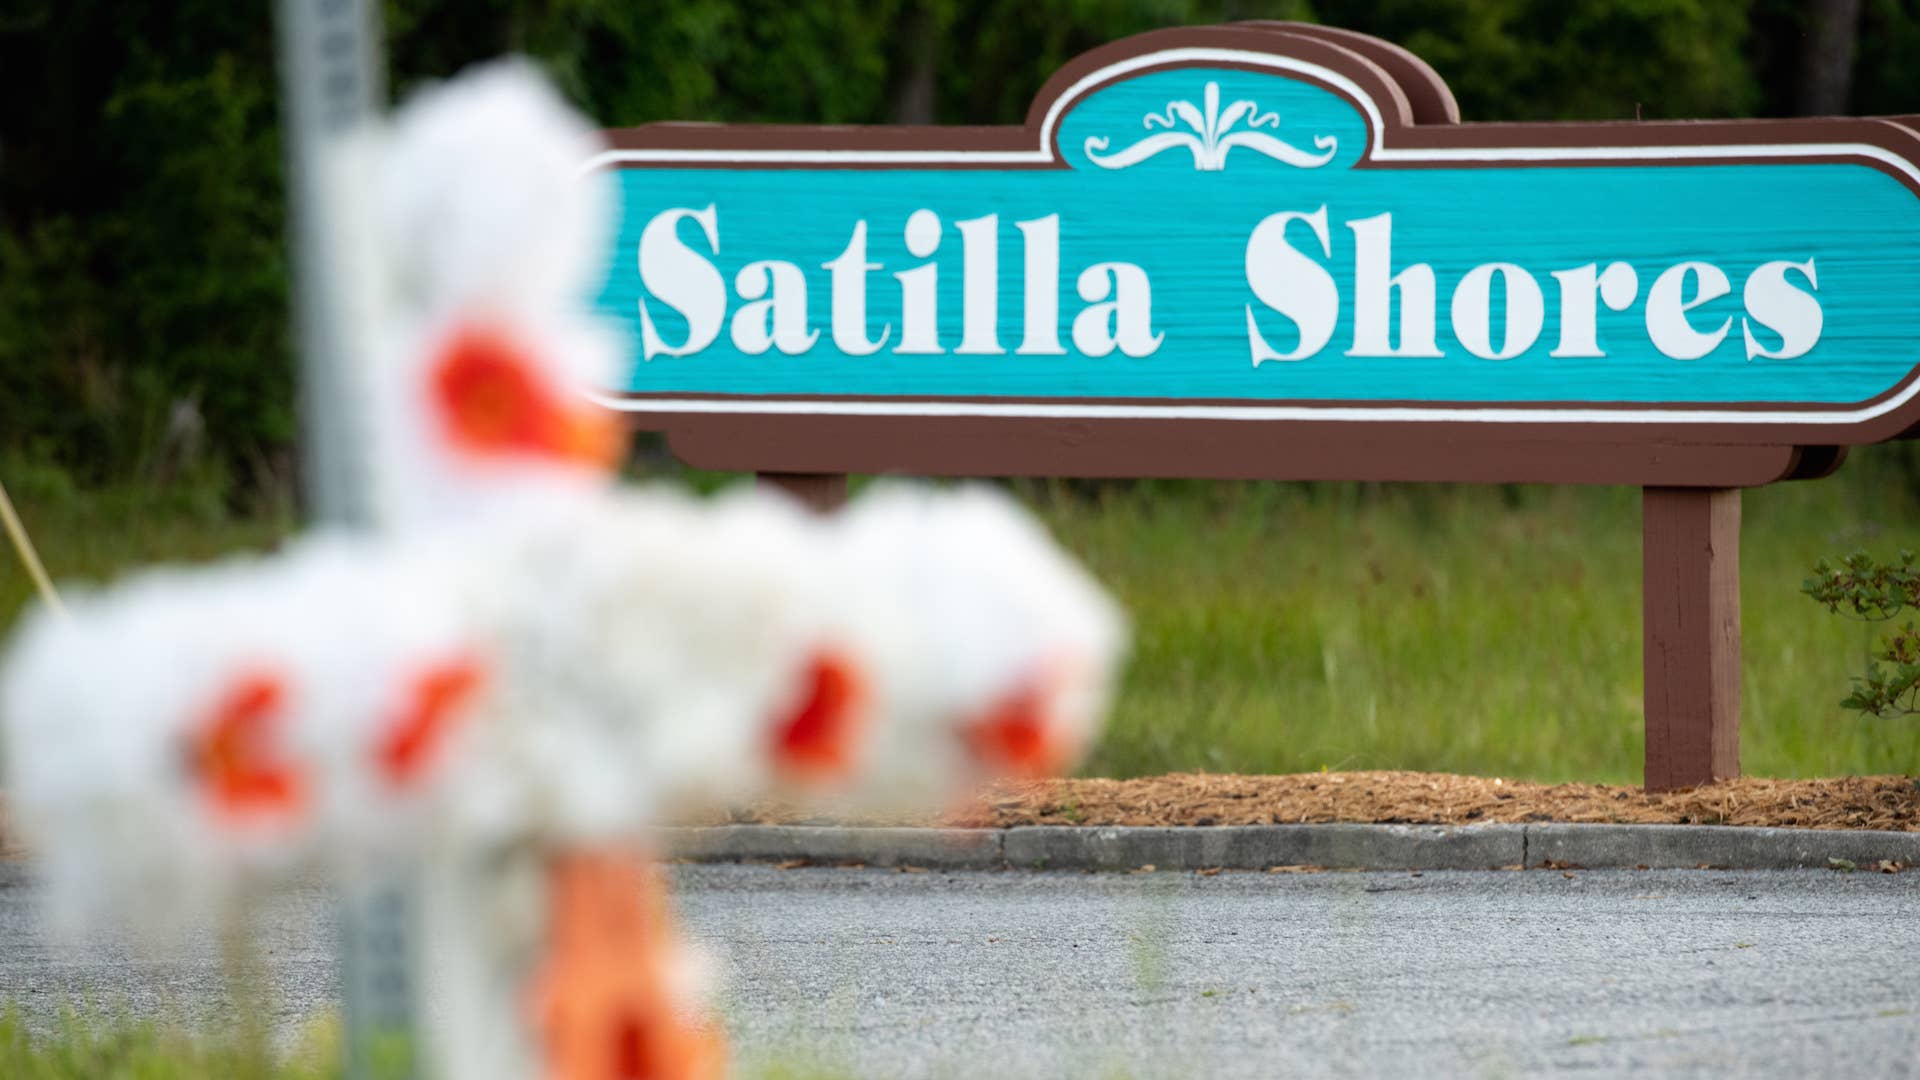 A cross with flowers and a letter "A" sits at the entrance to the Satilla Shores